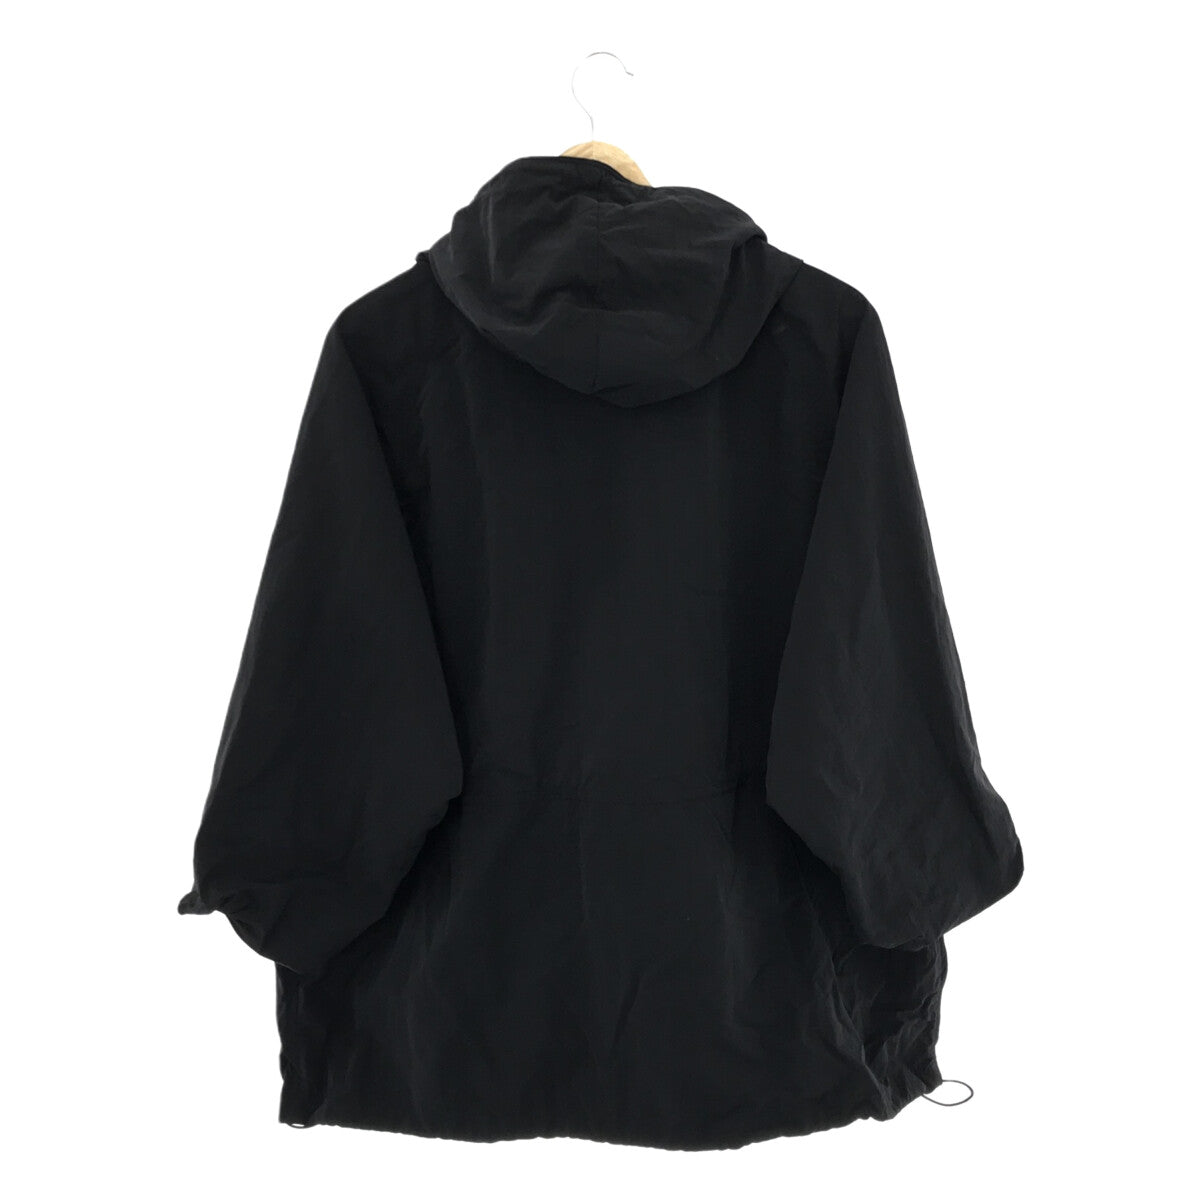 REMI RELIEF / レミレリーフ | 2022SS | × L'Appartement アパルトモン別注 Zip up 2wayブルゾン |  F |